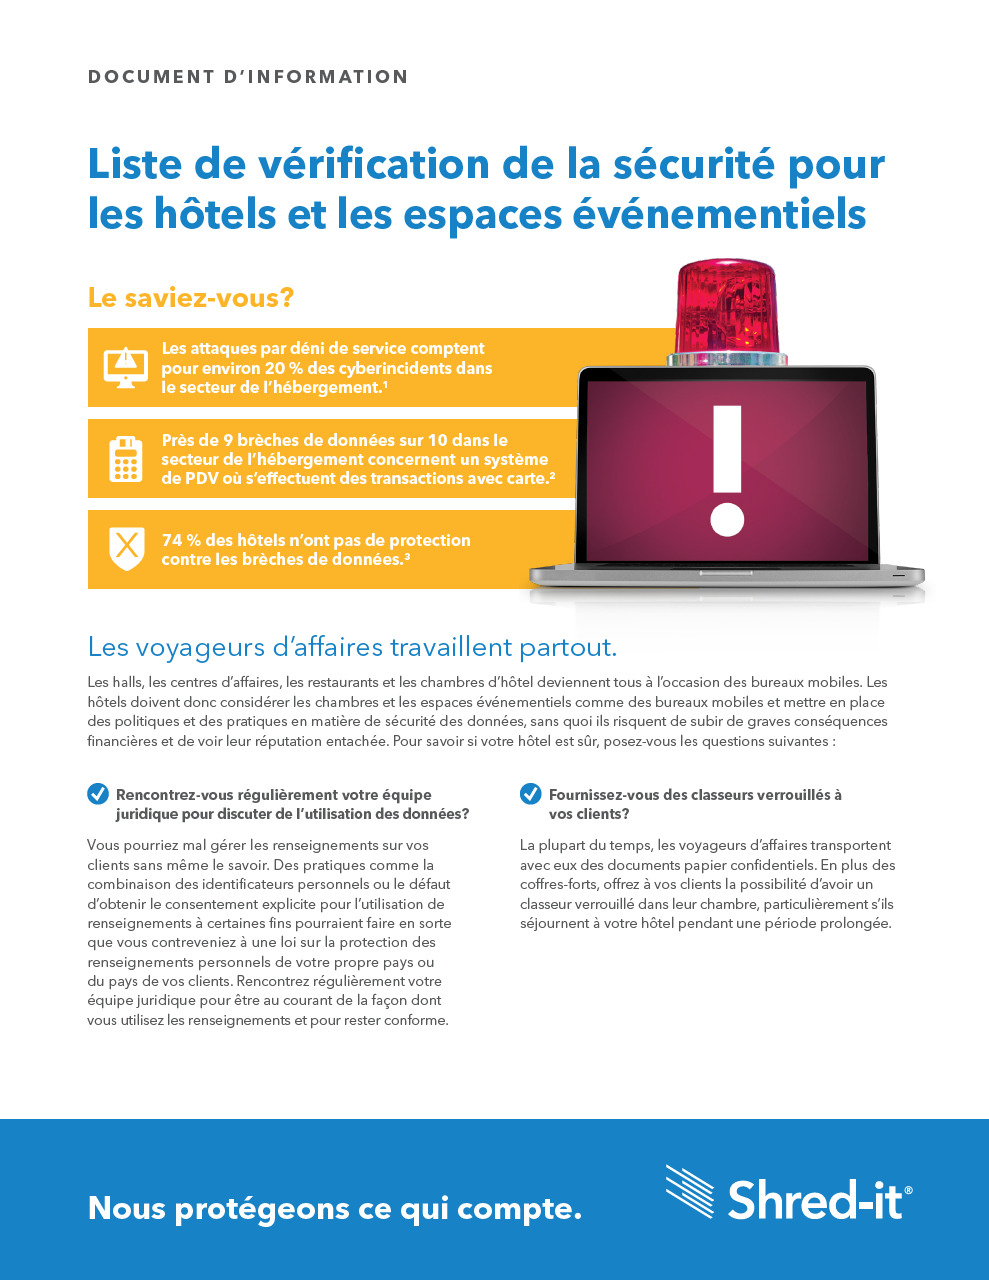 Shred-it-Hotel-Event-Space-Security-Checklist-French.pdf